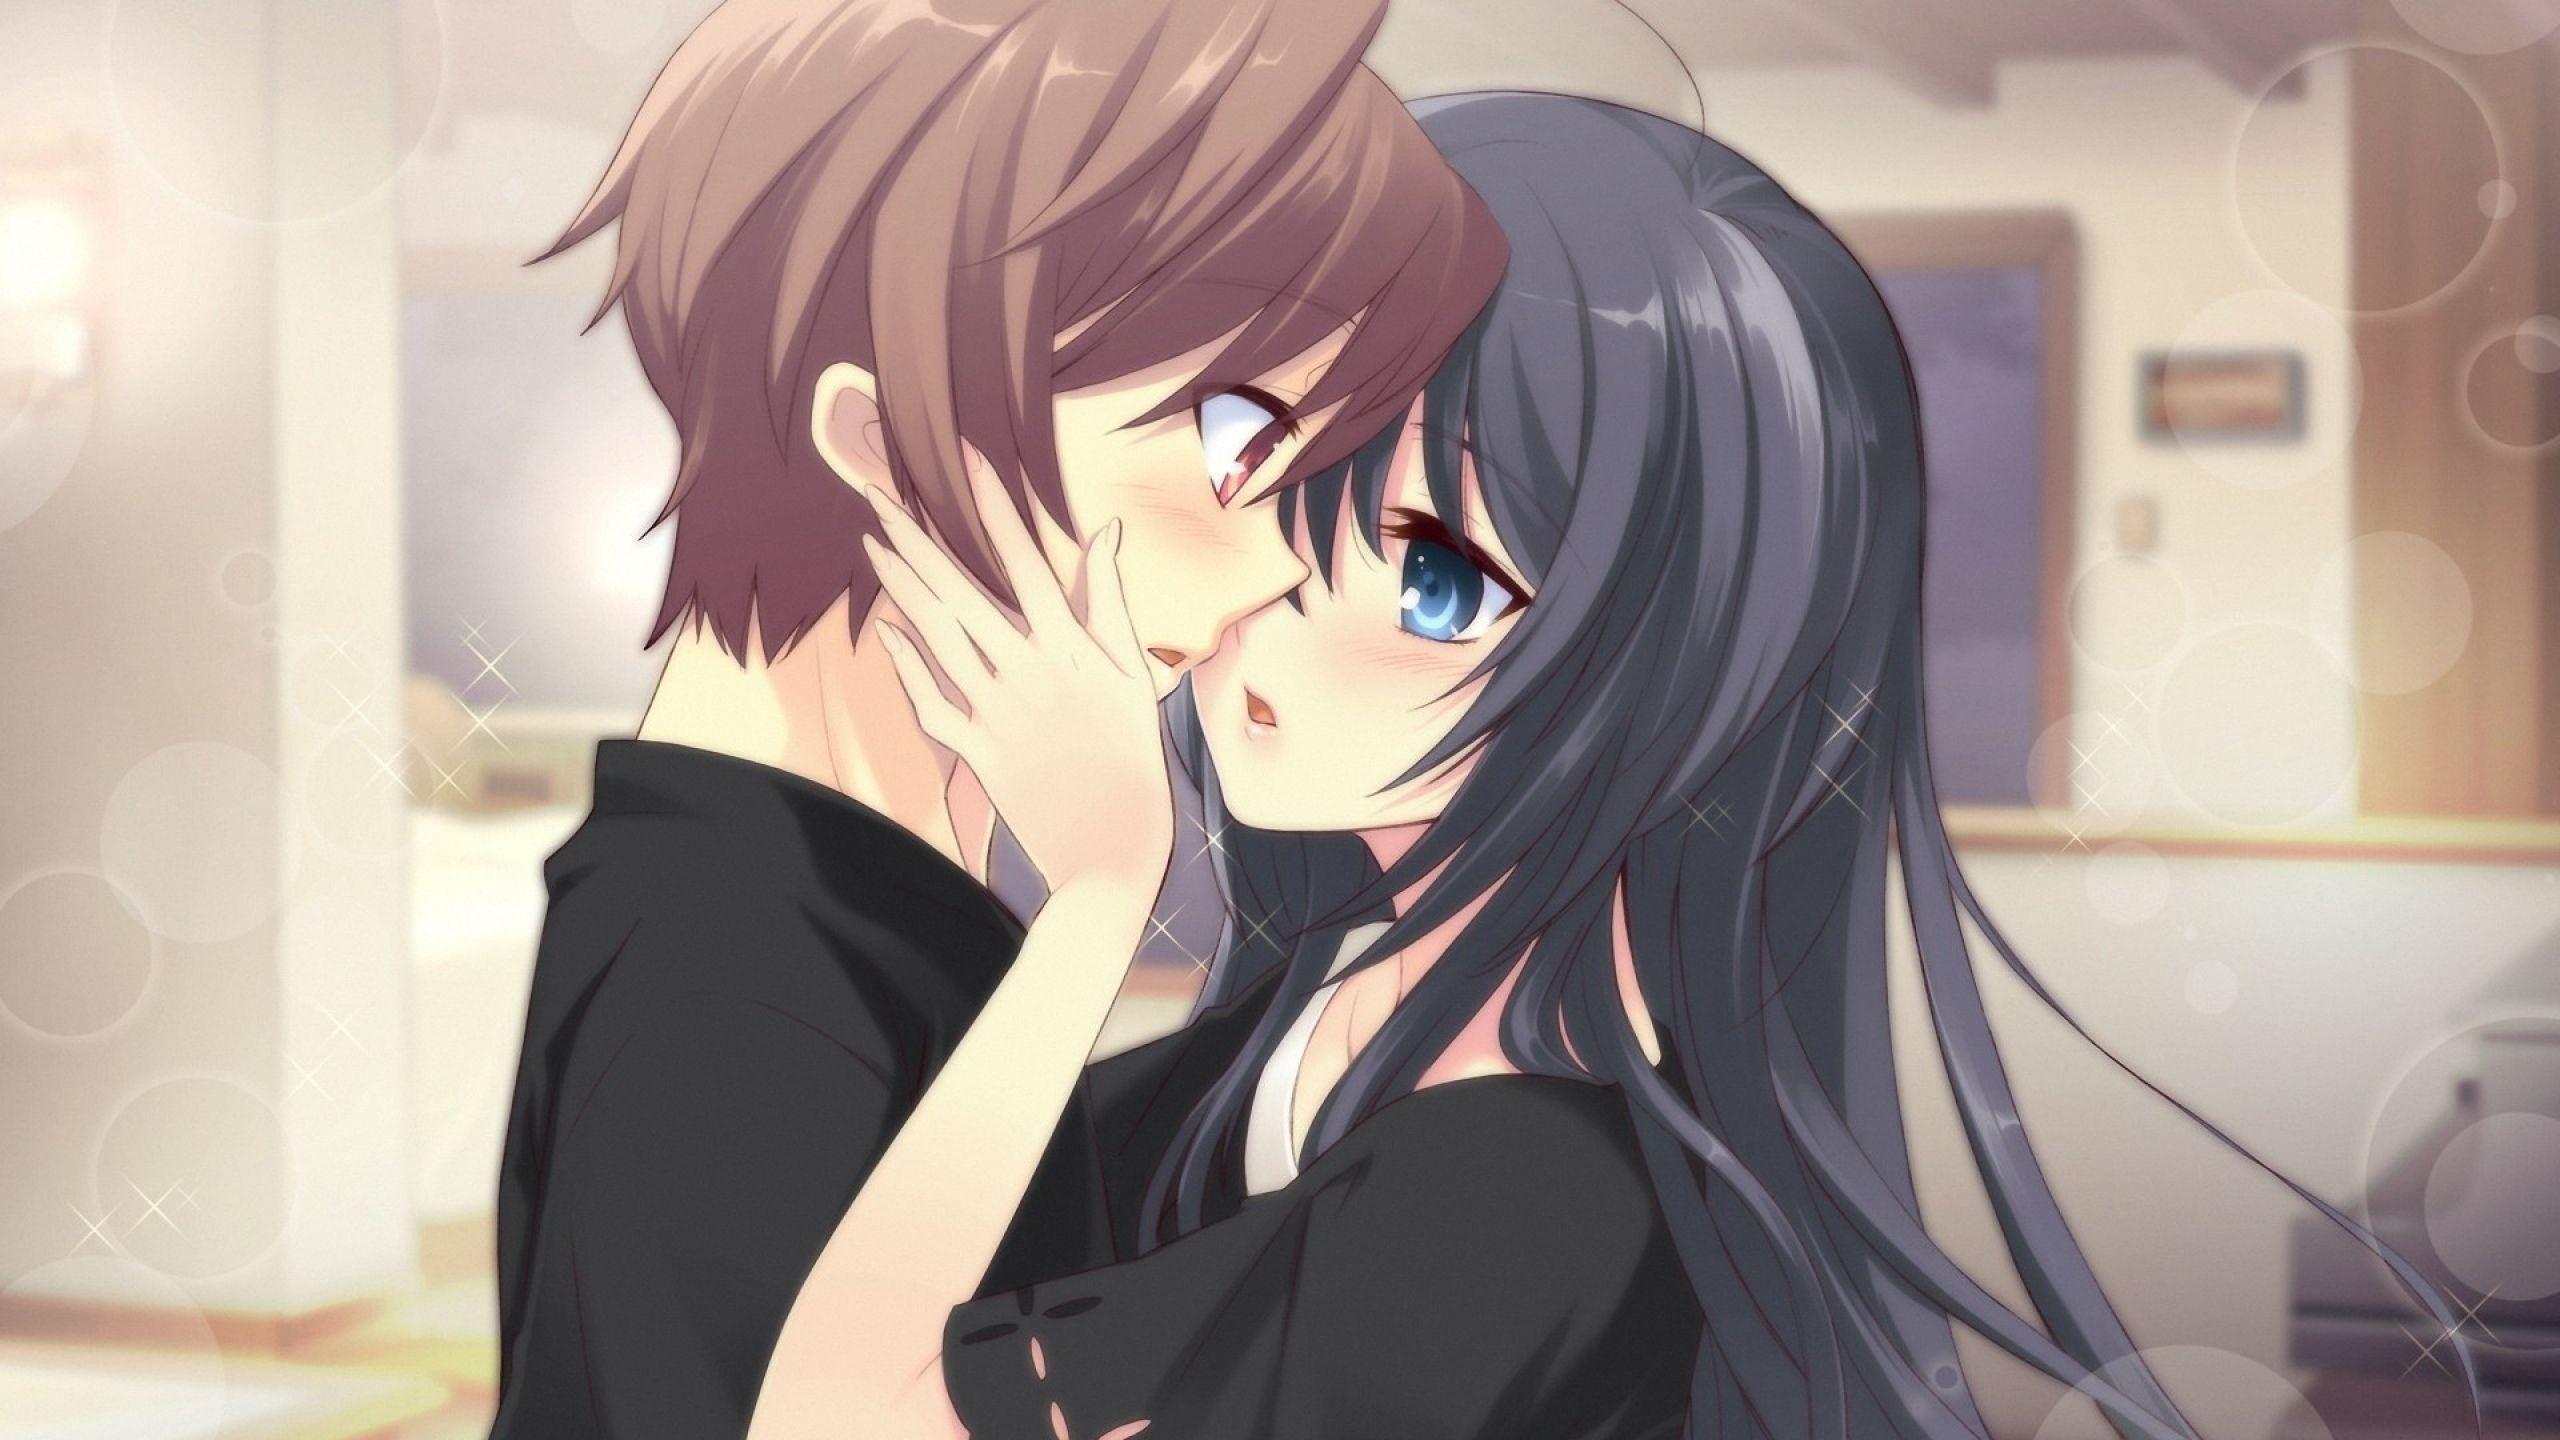 Fore head kiss - anime Wallpaper Download